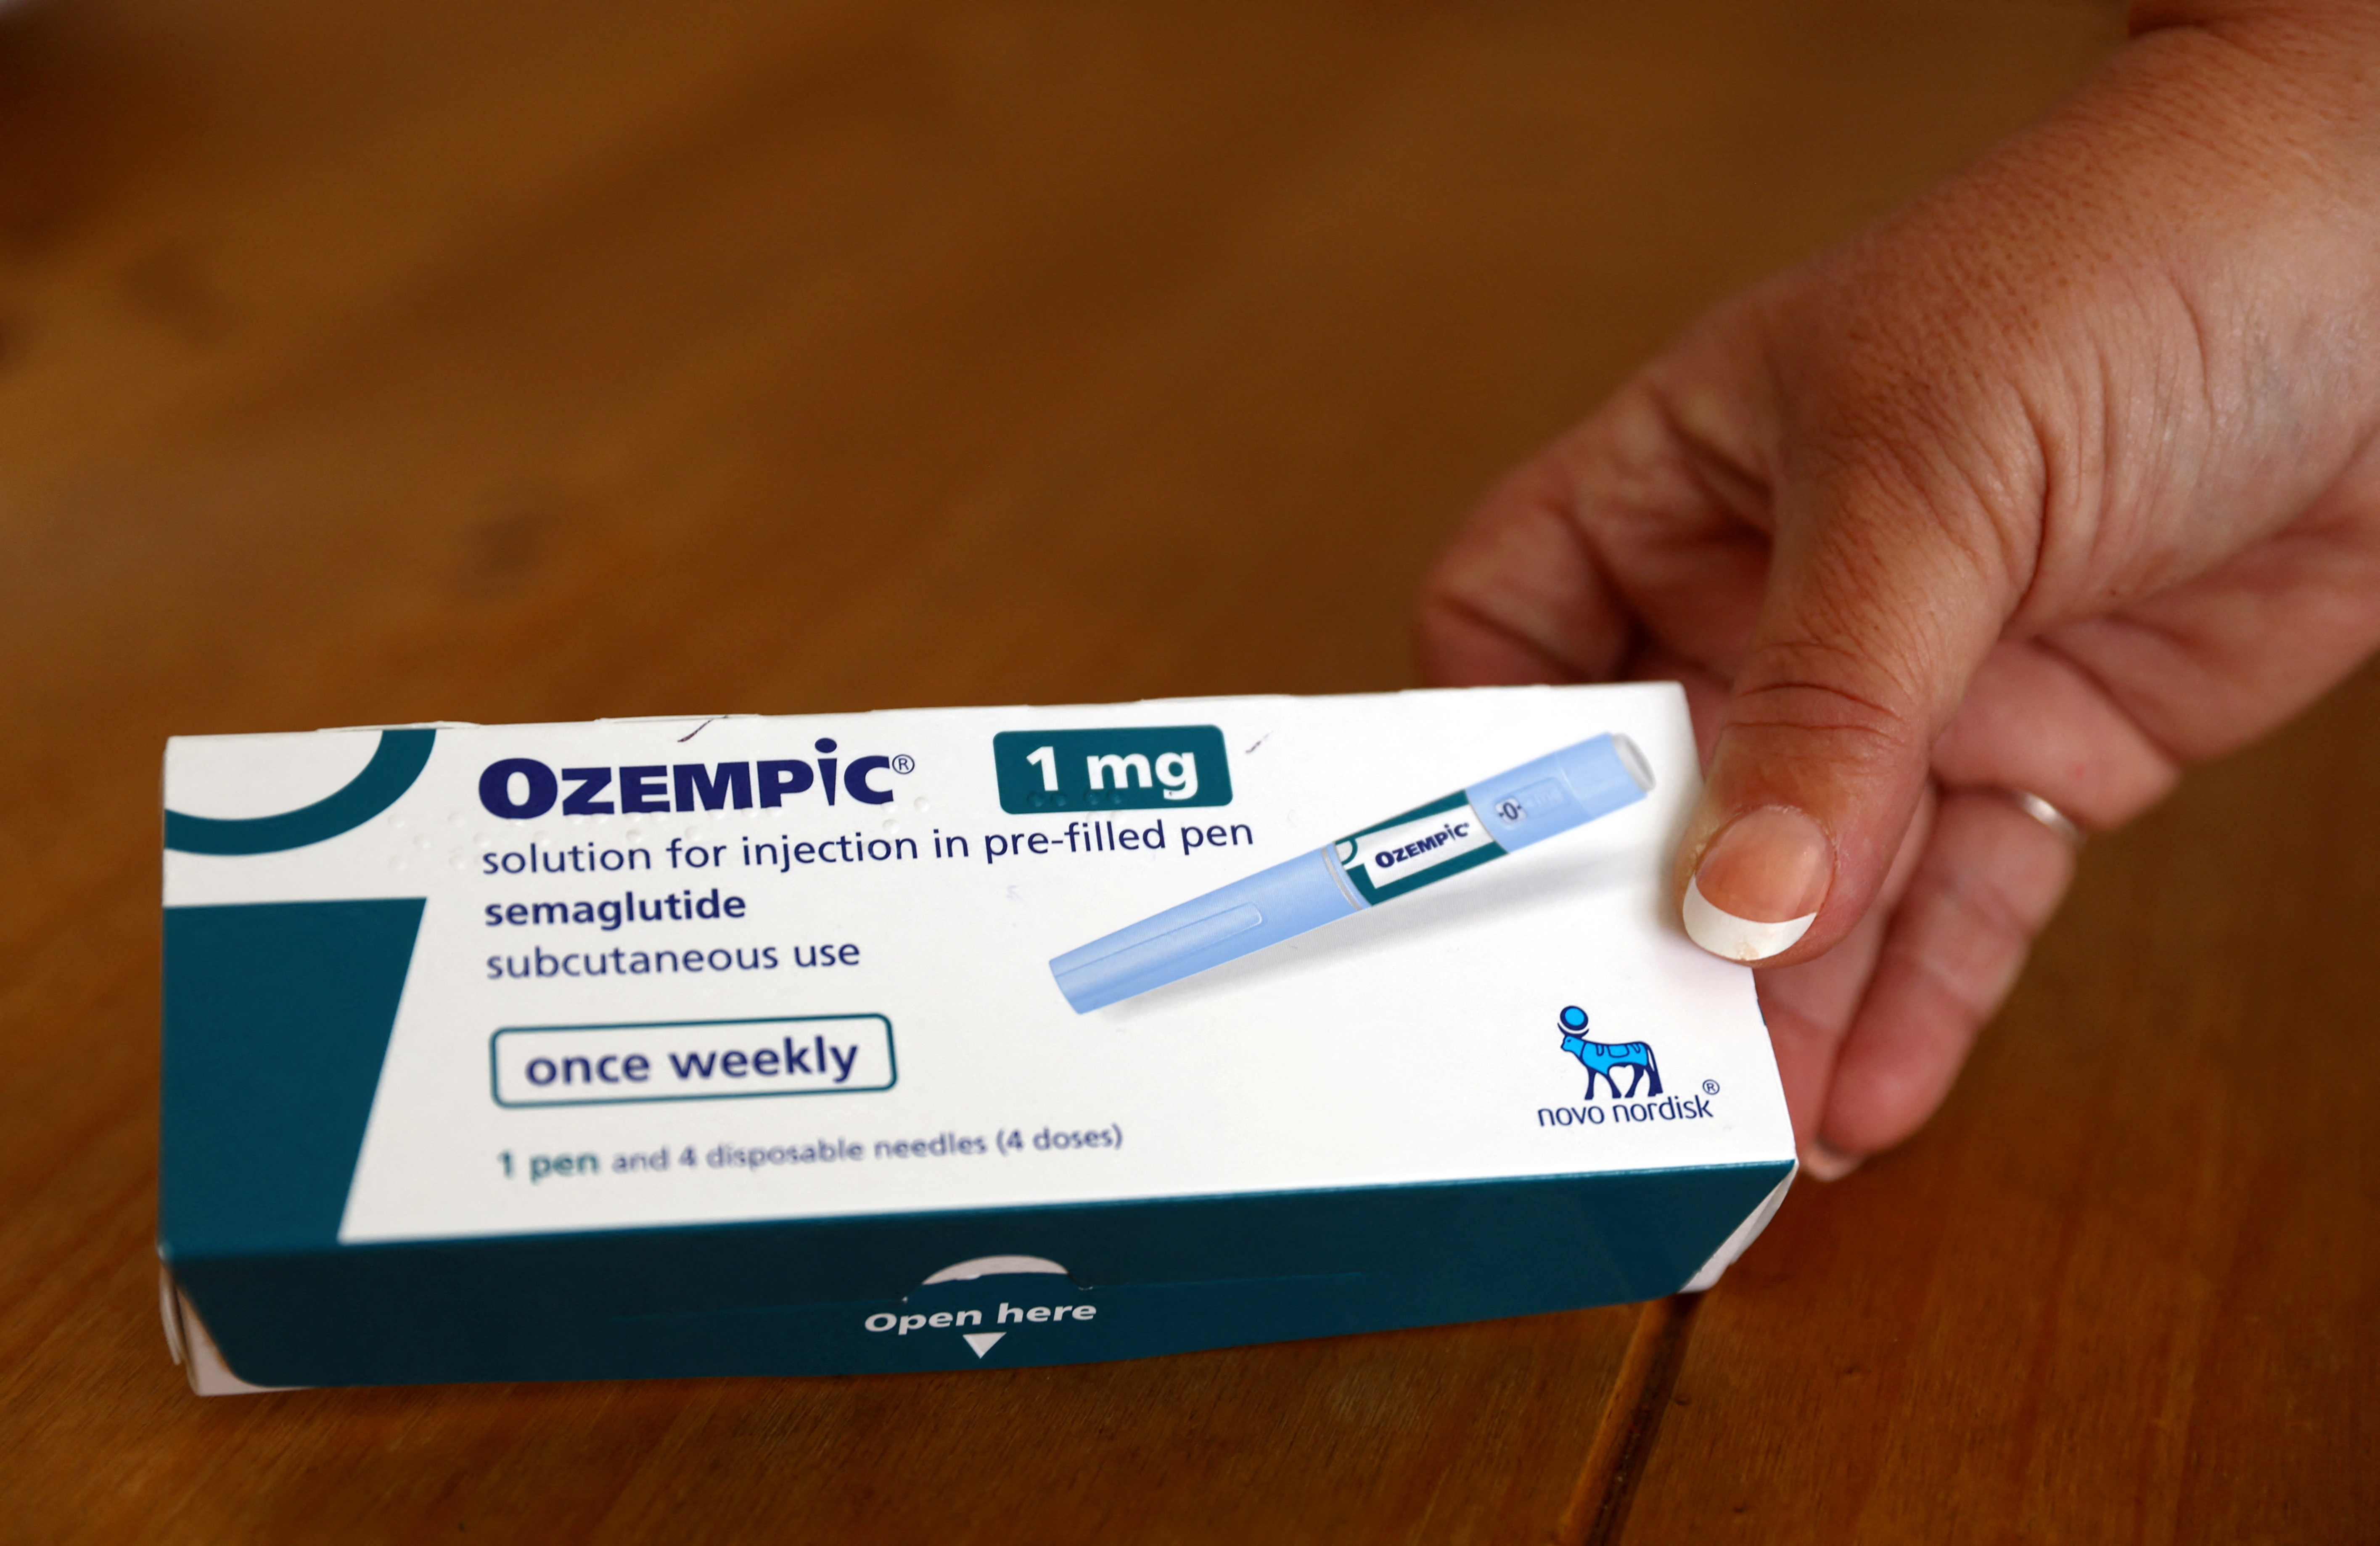 I was prescribed Ozempic online without speaking to a doctor